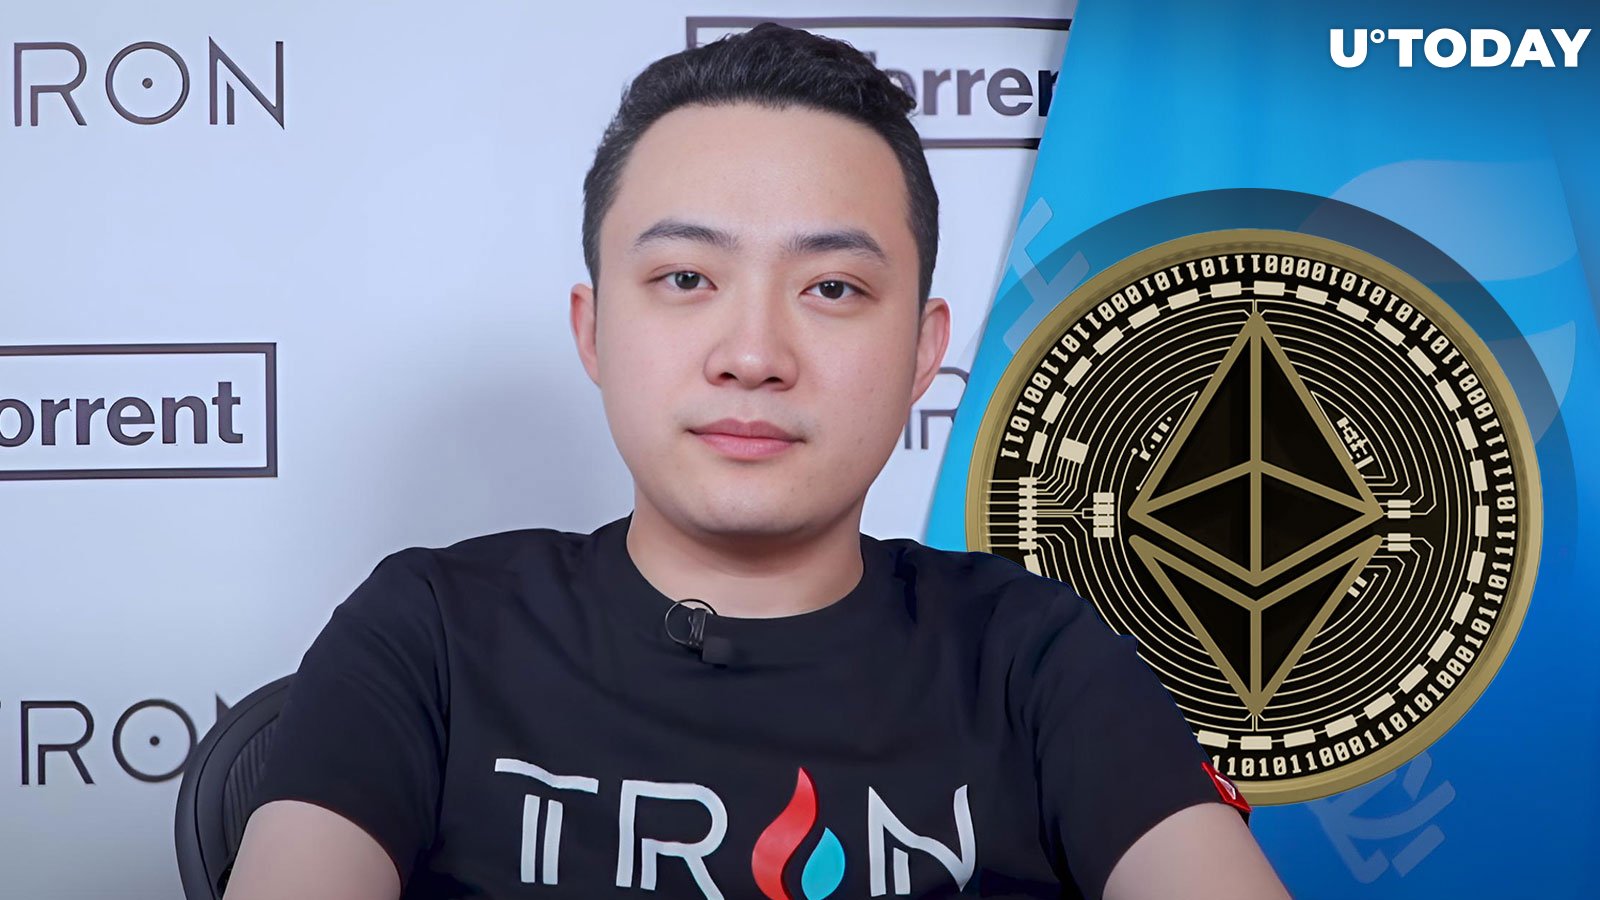 Tron Founder Justin Sun Sparks Concerns With $13.8 Million Ethereum Withdrawal From Binance